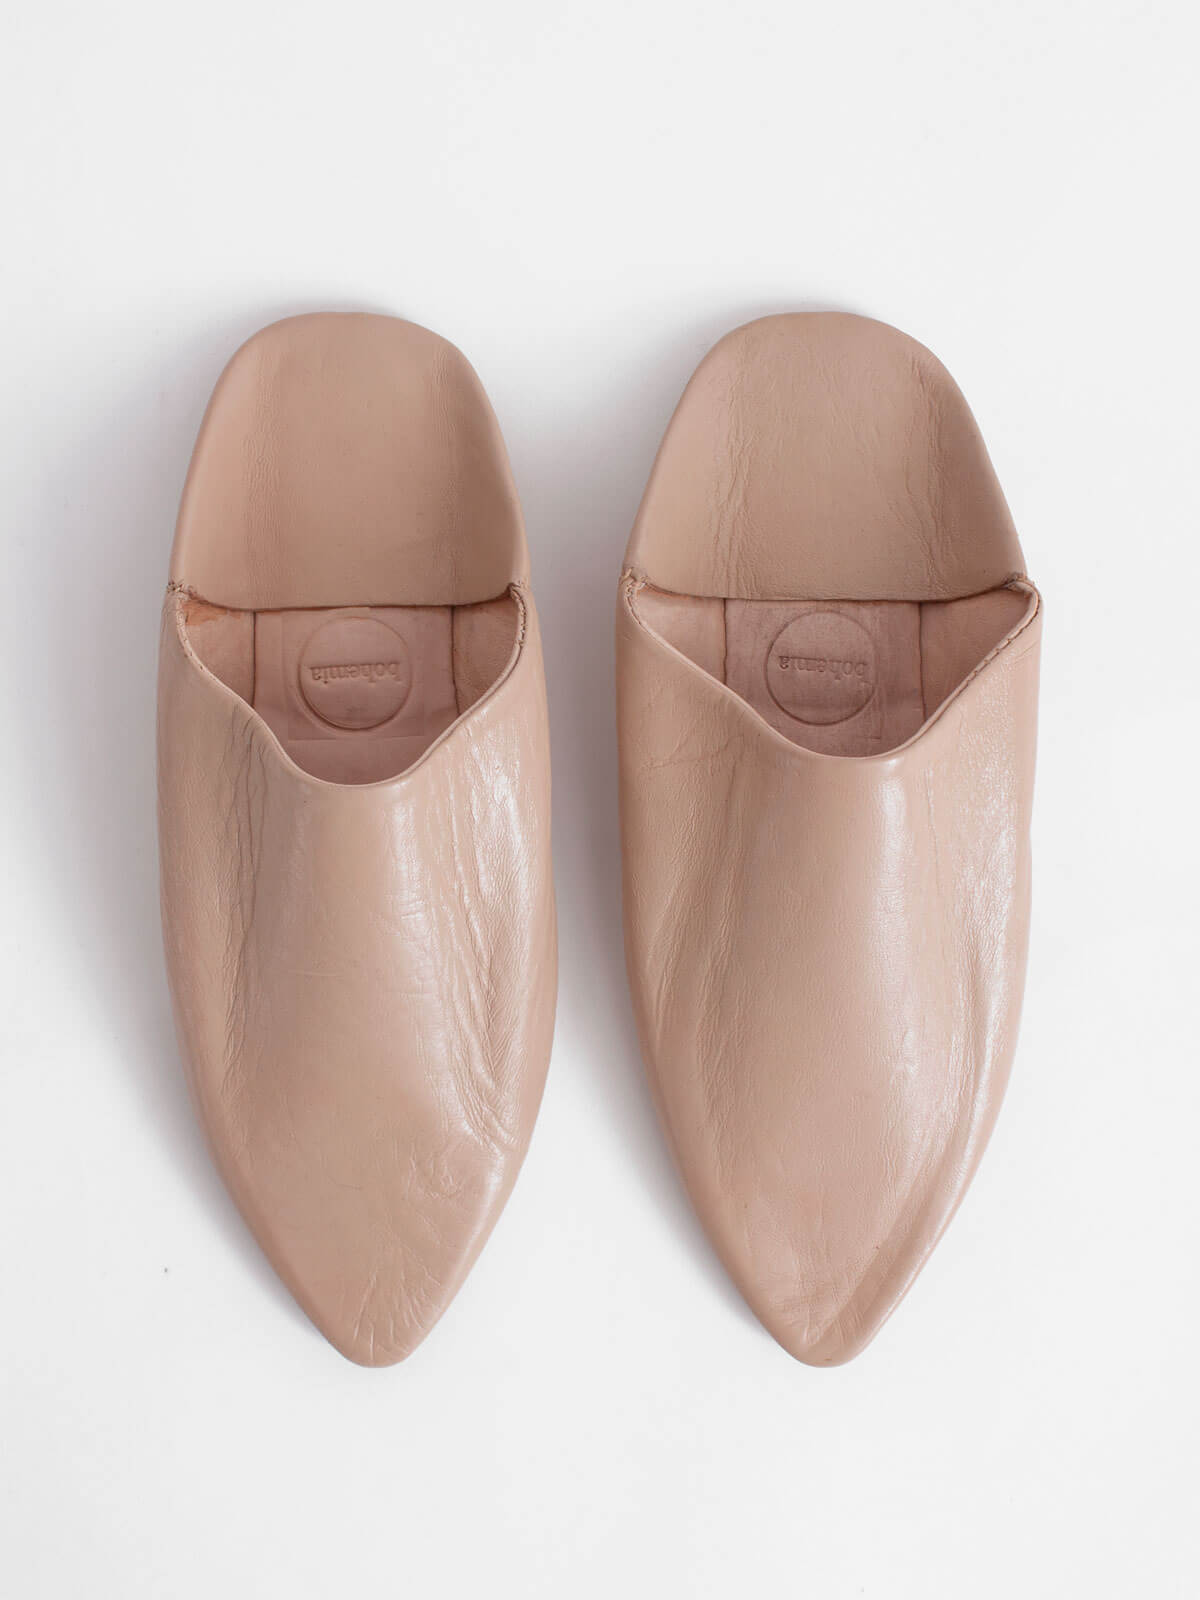 Moroccan Classic Pointed Babouche Slippers, Nude